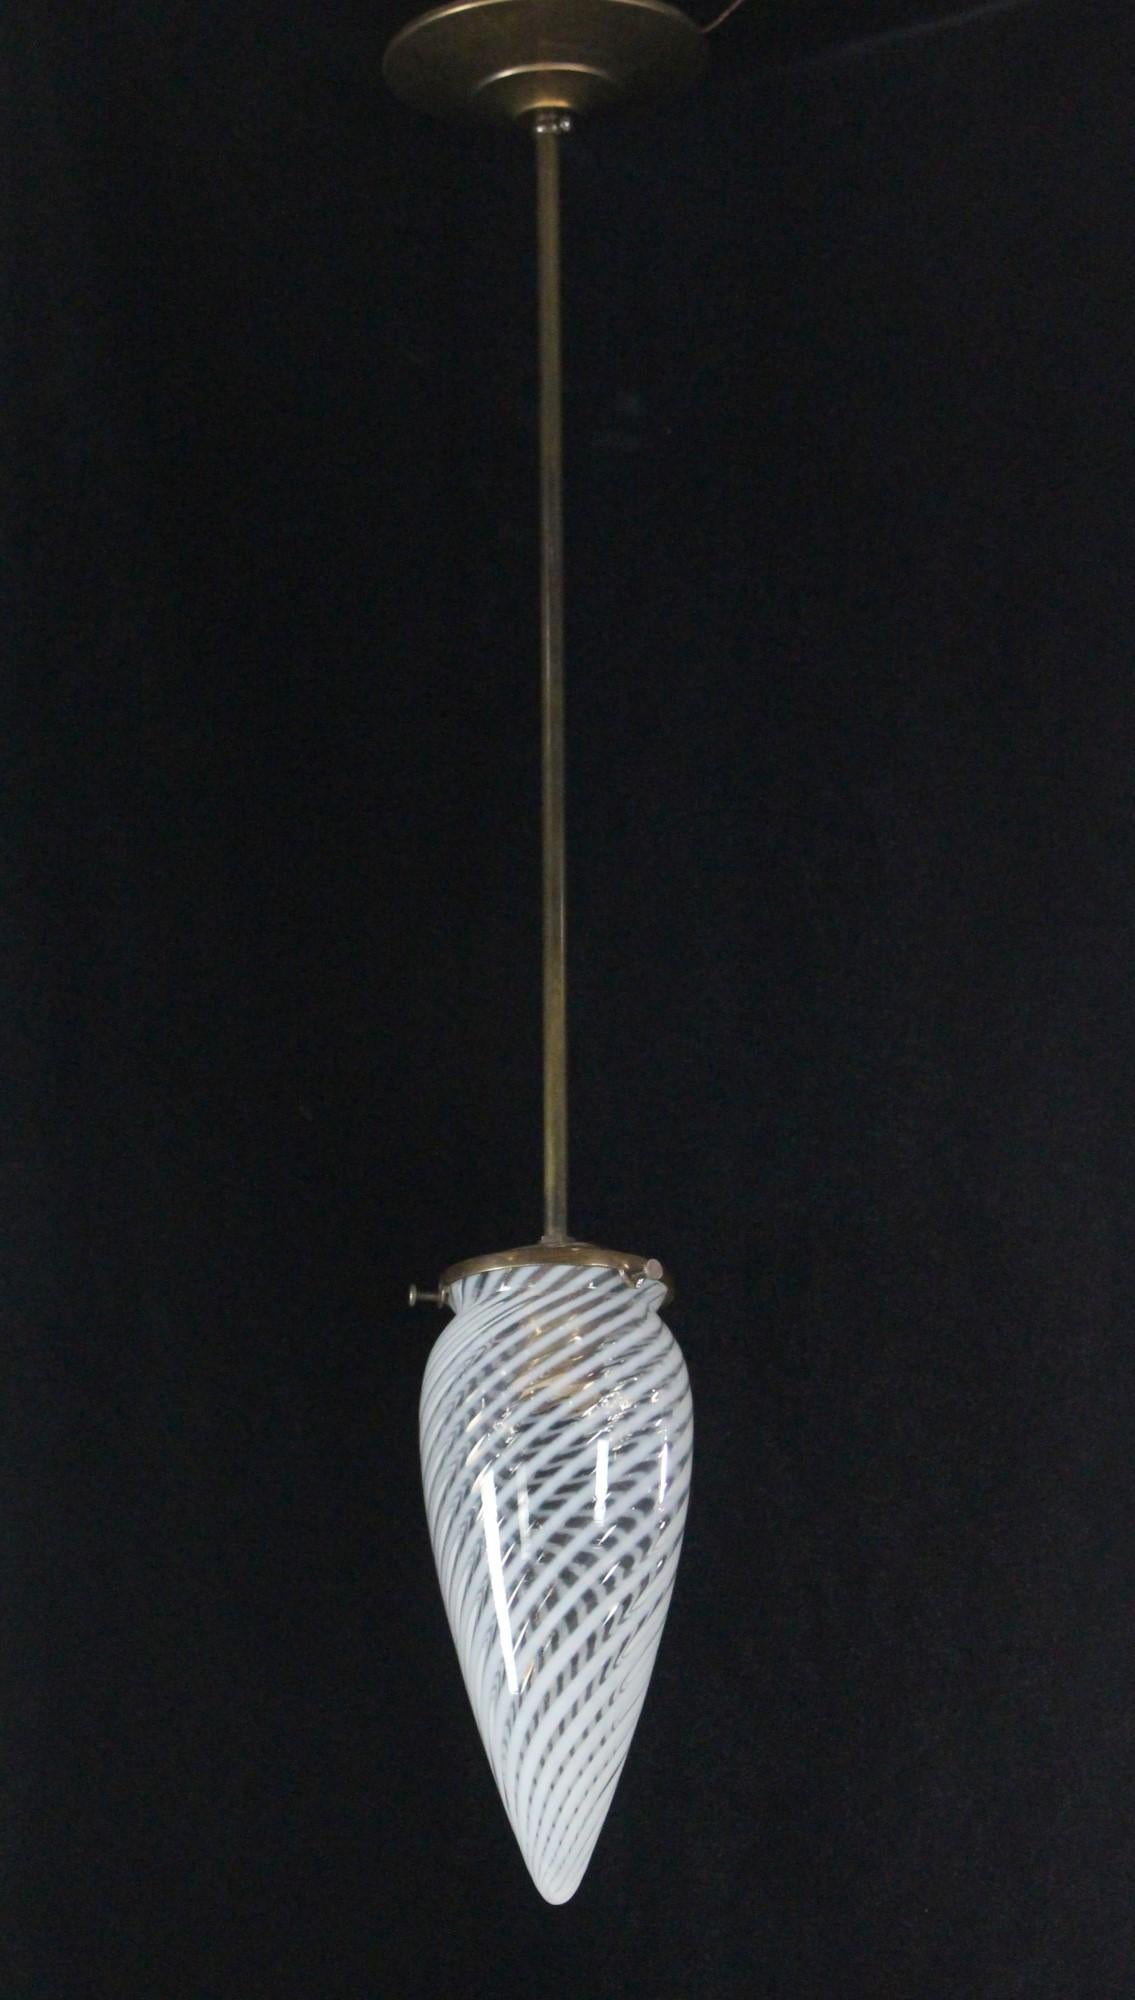 Late 20th Century Vaseline glass shade with swirls caps off this brass pendant light with pole. Brass hardware and wiring is new. Please note, this item is located in our Scranton, PA location.